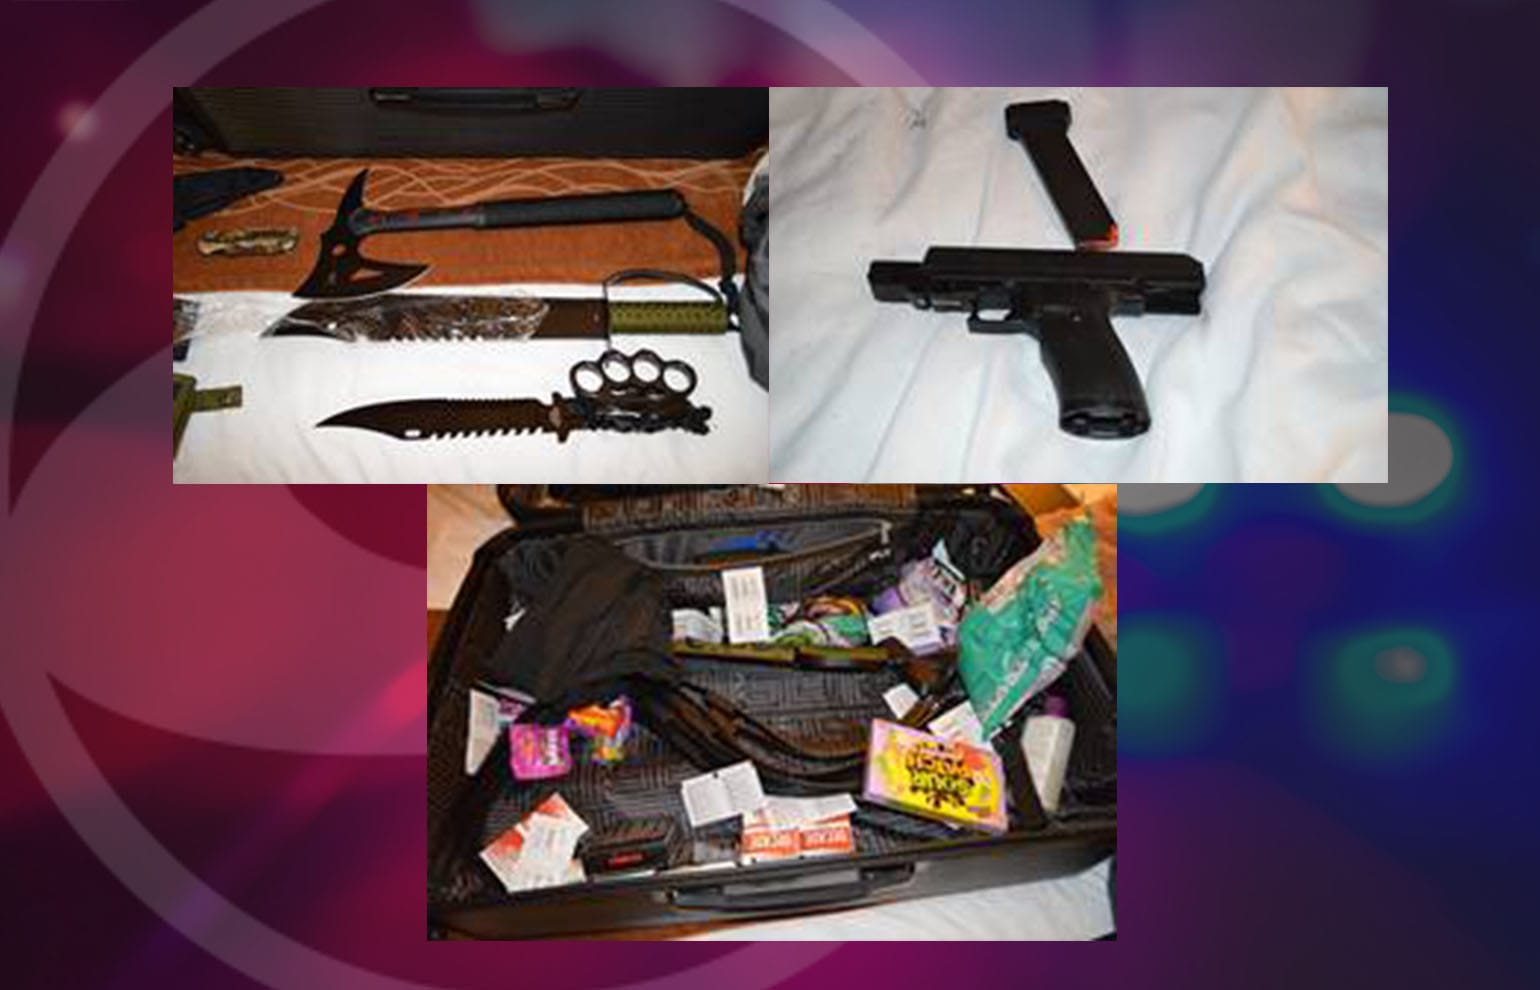 Detectives executed a search warrant at the Vancouver hotel room of Samuel Aaron Leonard, 39, of New Port Richey, Fla., and located what appears to be a kidnappers kit which included heavy duty flex cuffs, handcuffs, duct tape, rubber gloves, face wrap/blindfold, lubricant, a sex toy, several large knives, a hatchet, and a .45 caliber handgun and ammunition.